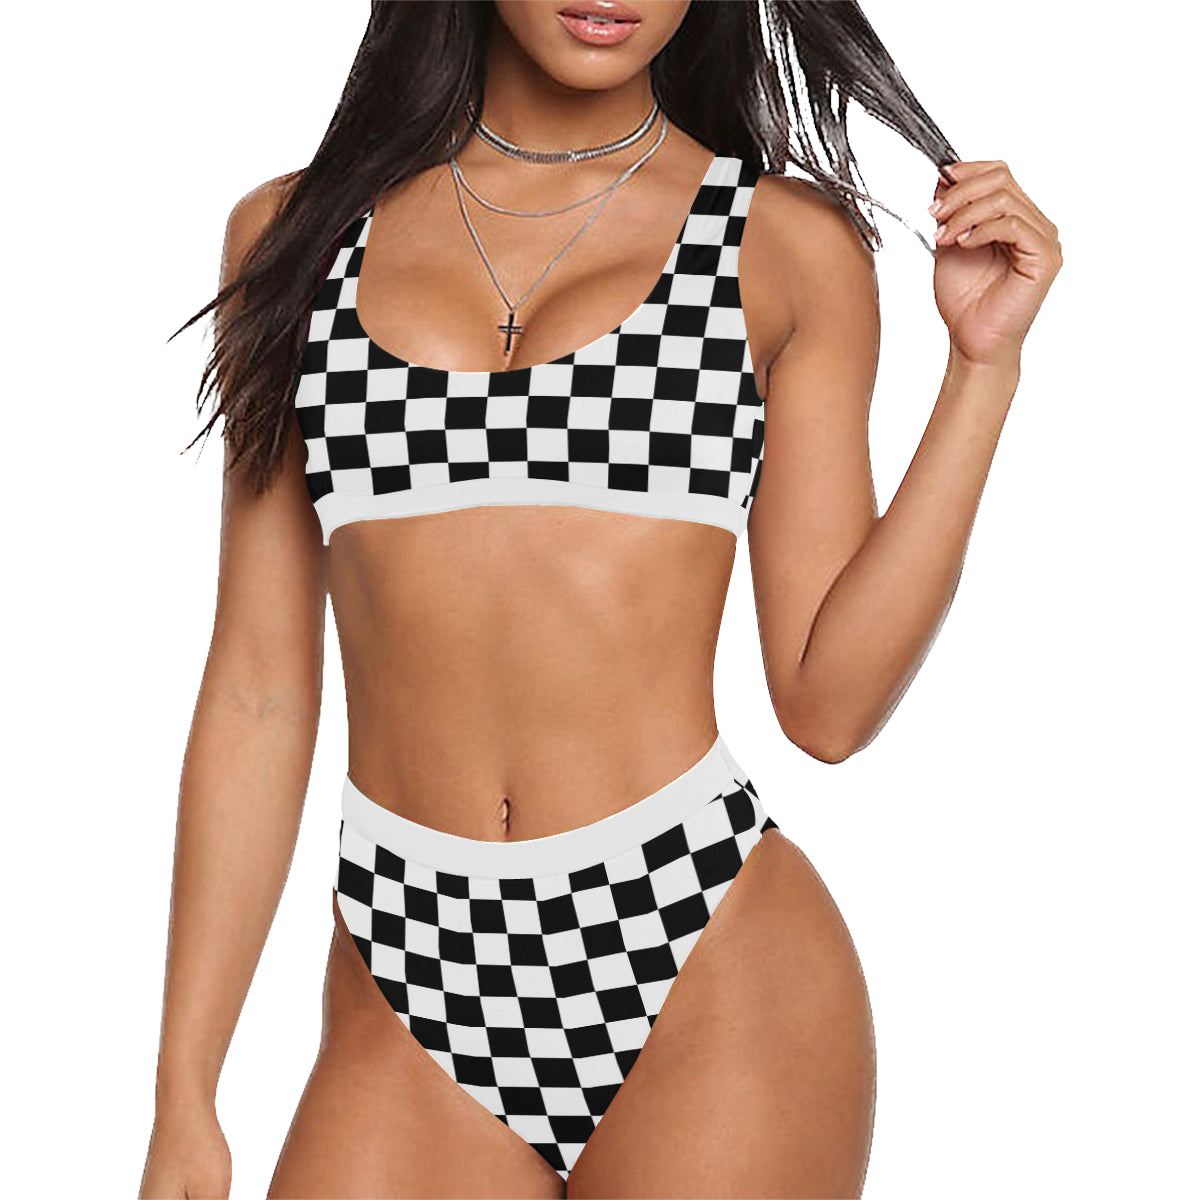 Checkered Bikini Set, High Waisted Black White Checkerboard 80s 90s Top Check Cheeky Rave Swimsuit Swimwear Bathing Suit Plus Size Two Piece Starcove Fashion